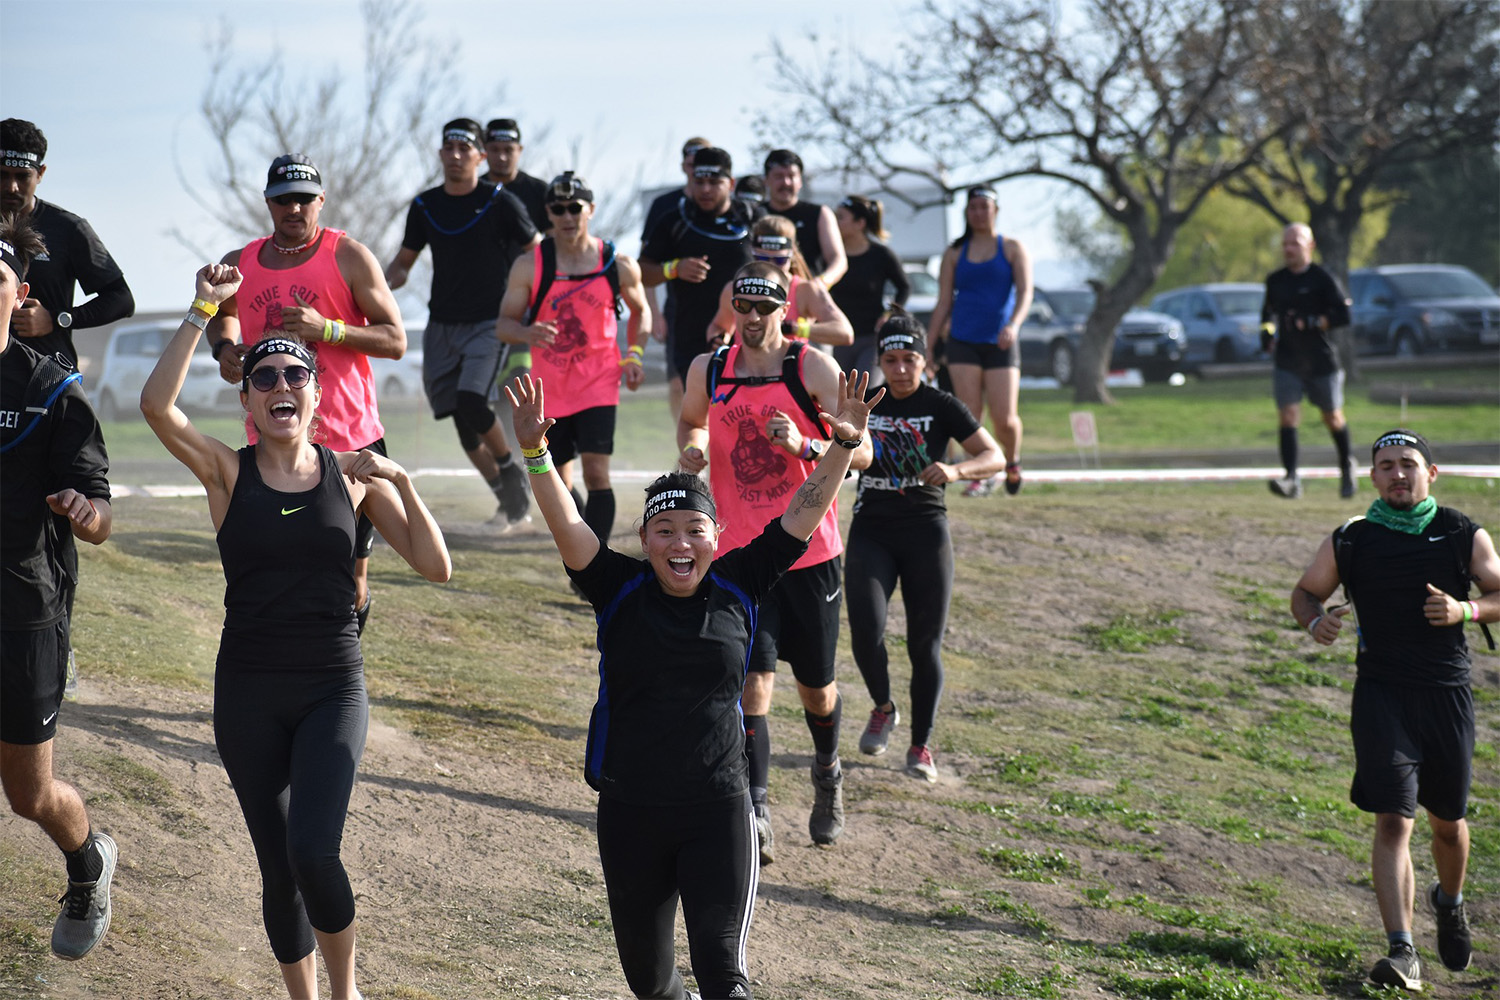 participants in the Spartan race arrive at the finish line 